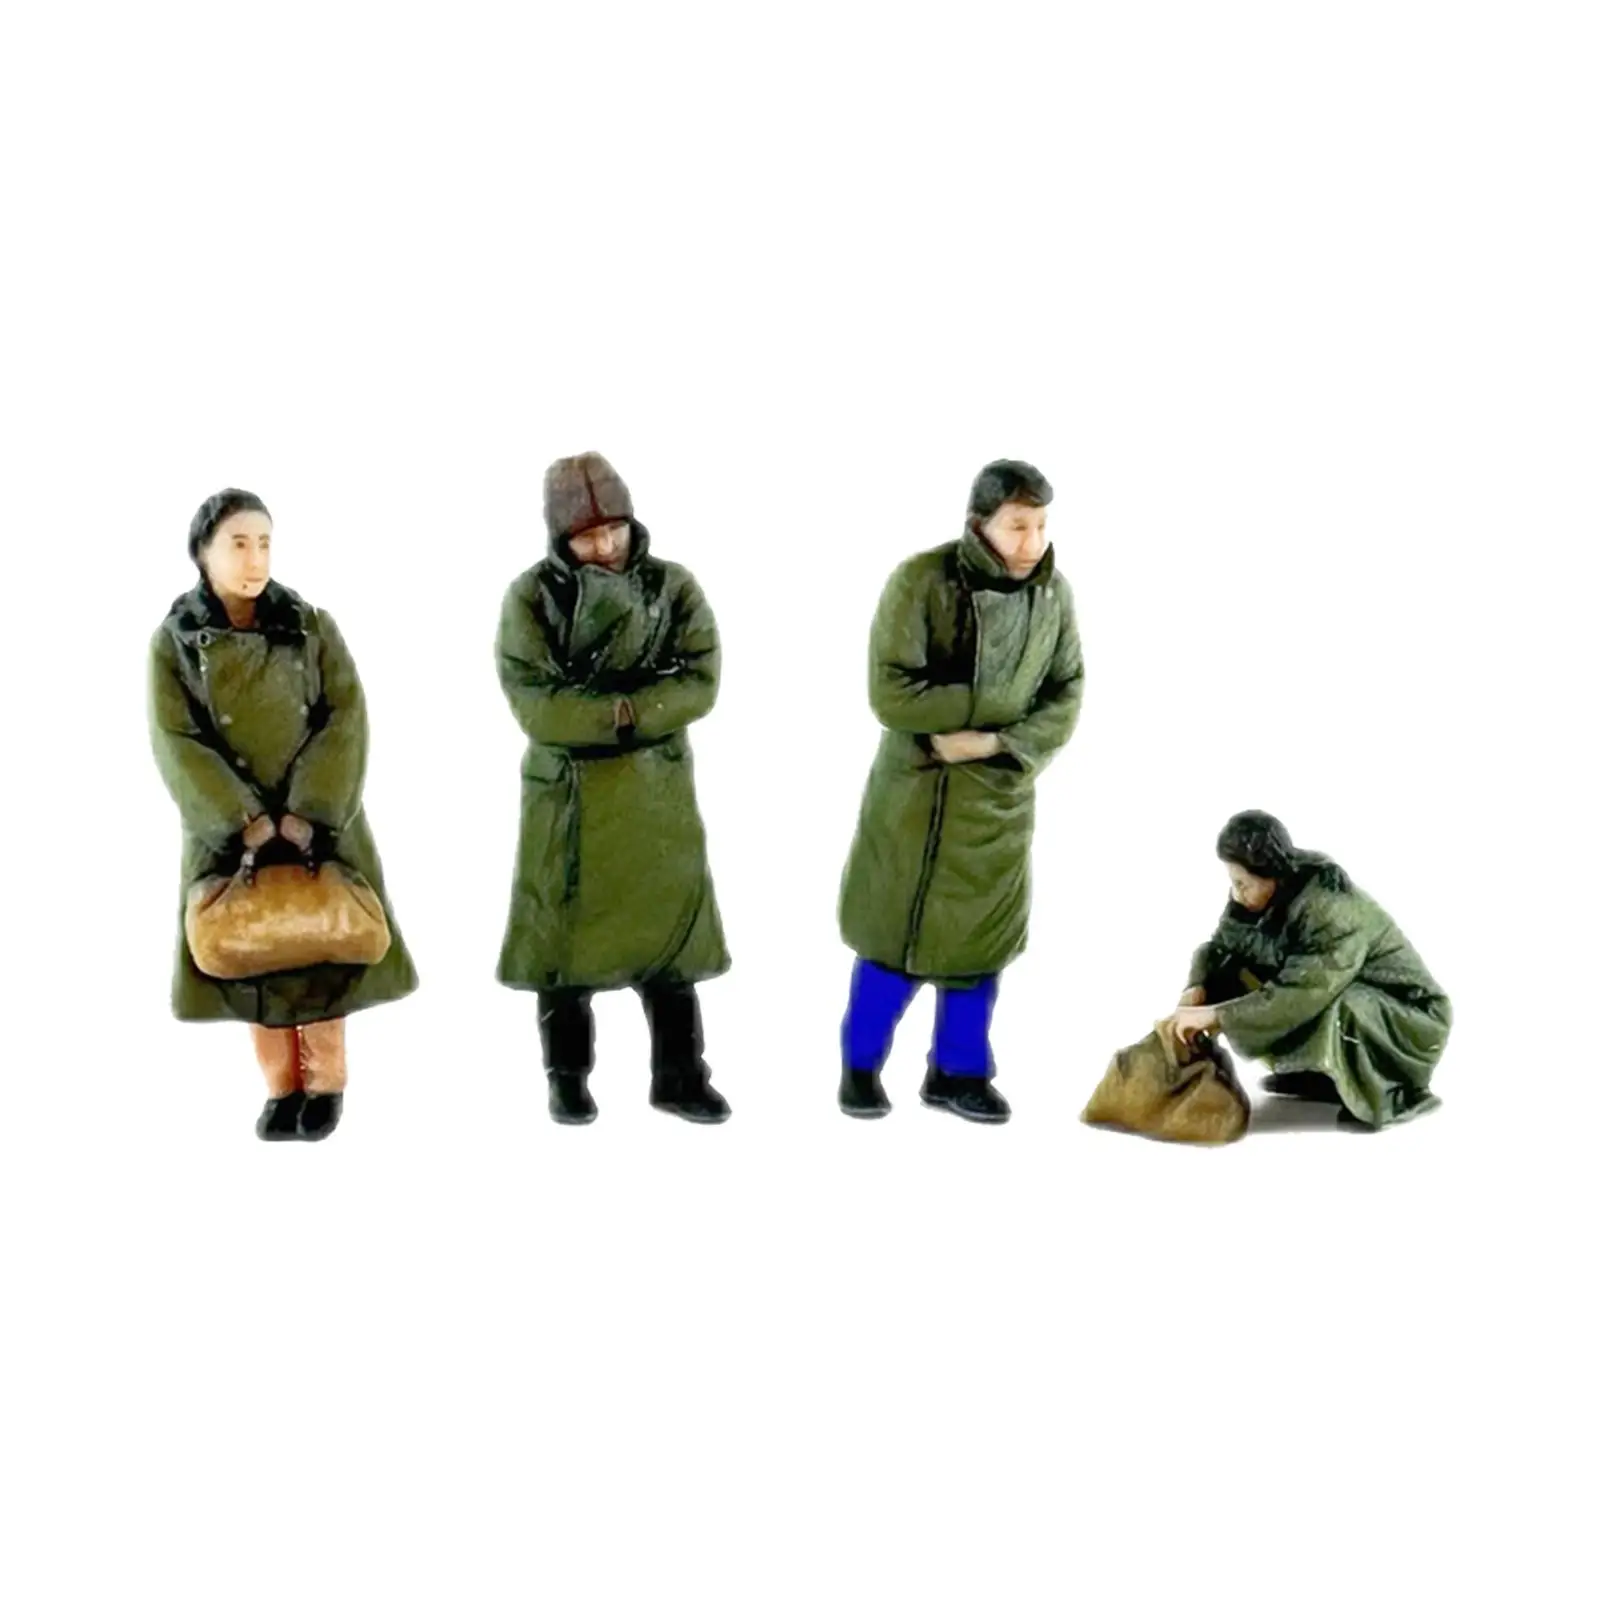 4Pcs 1:64 Realistic Diorama Character Figure for Dollhouse Micro Landscapes